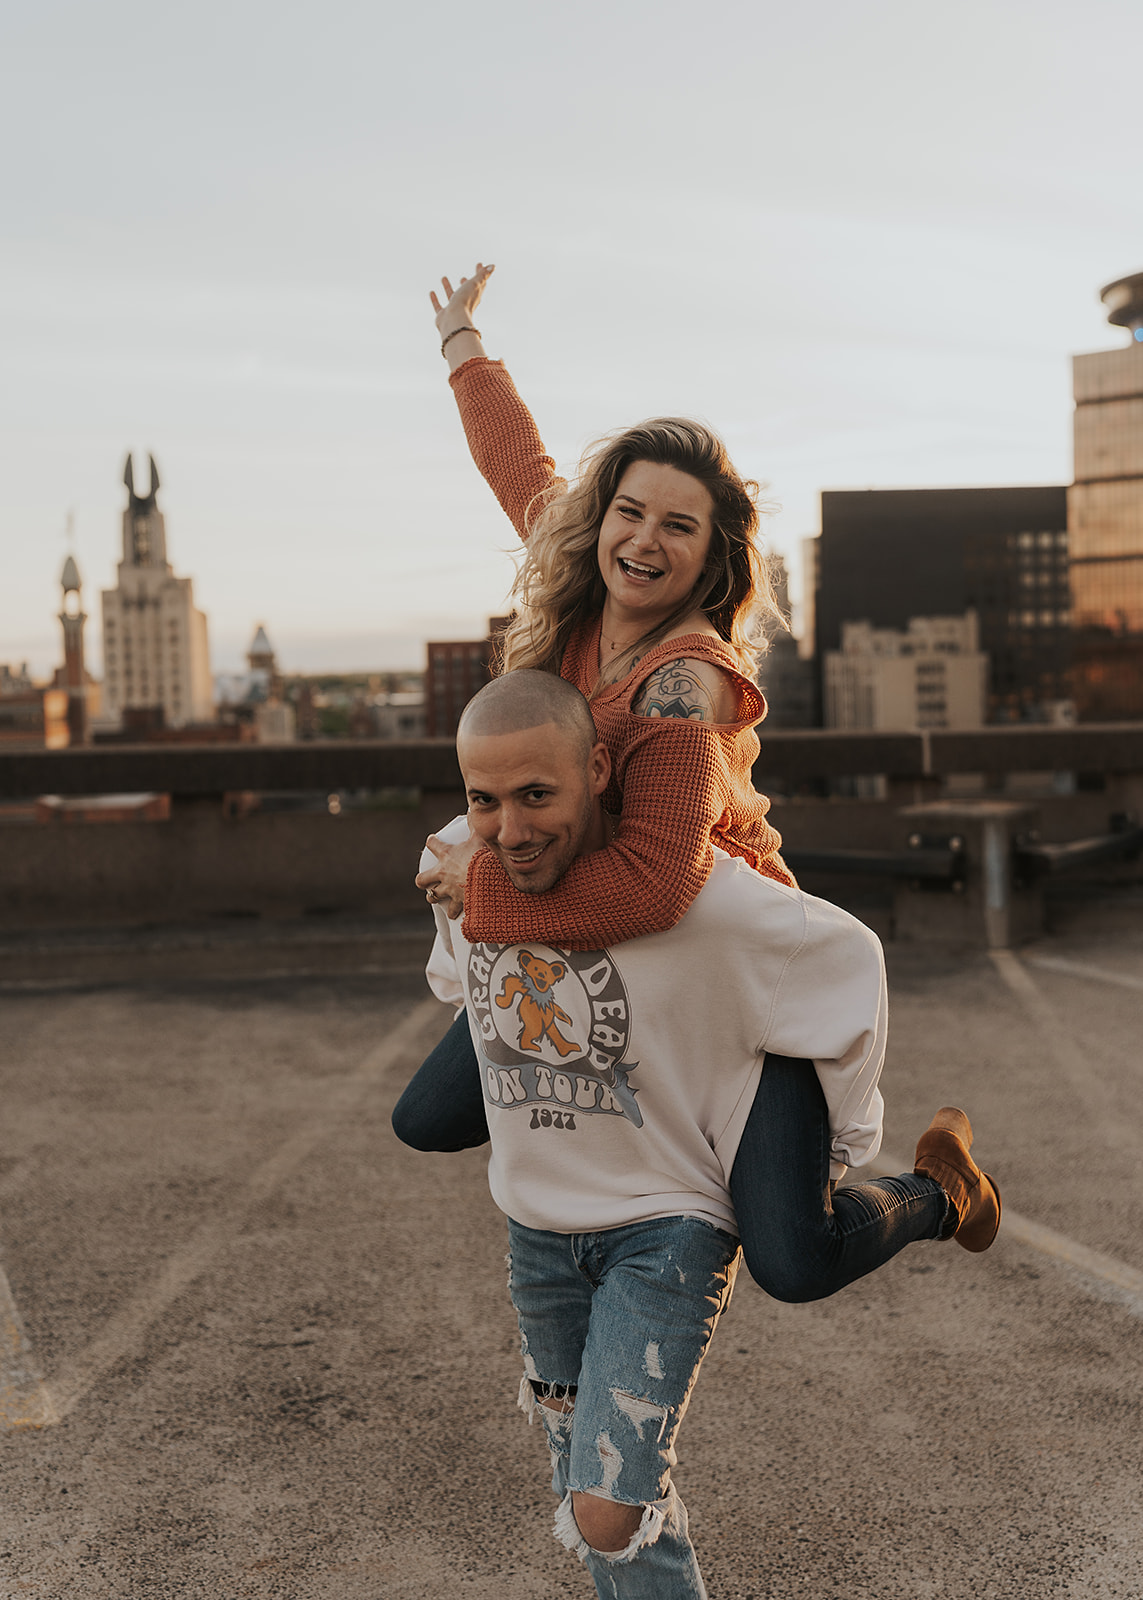 fiance giving his girlfriend a piggy back ride wile on top of a parking garage during their engagement session